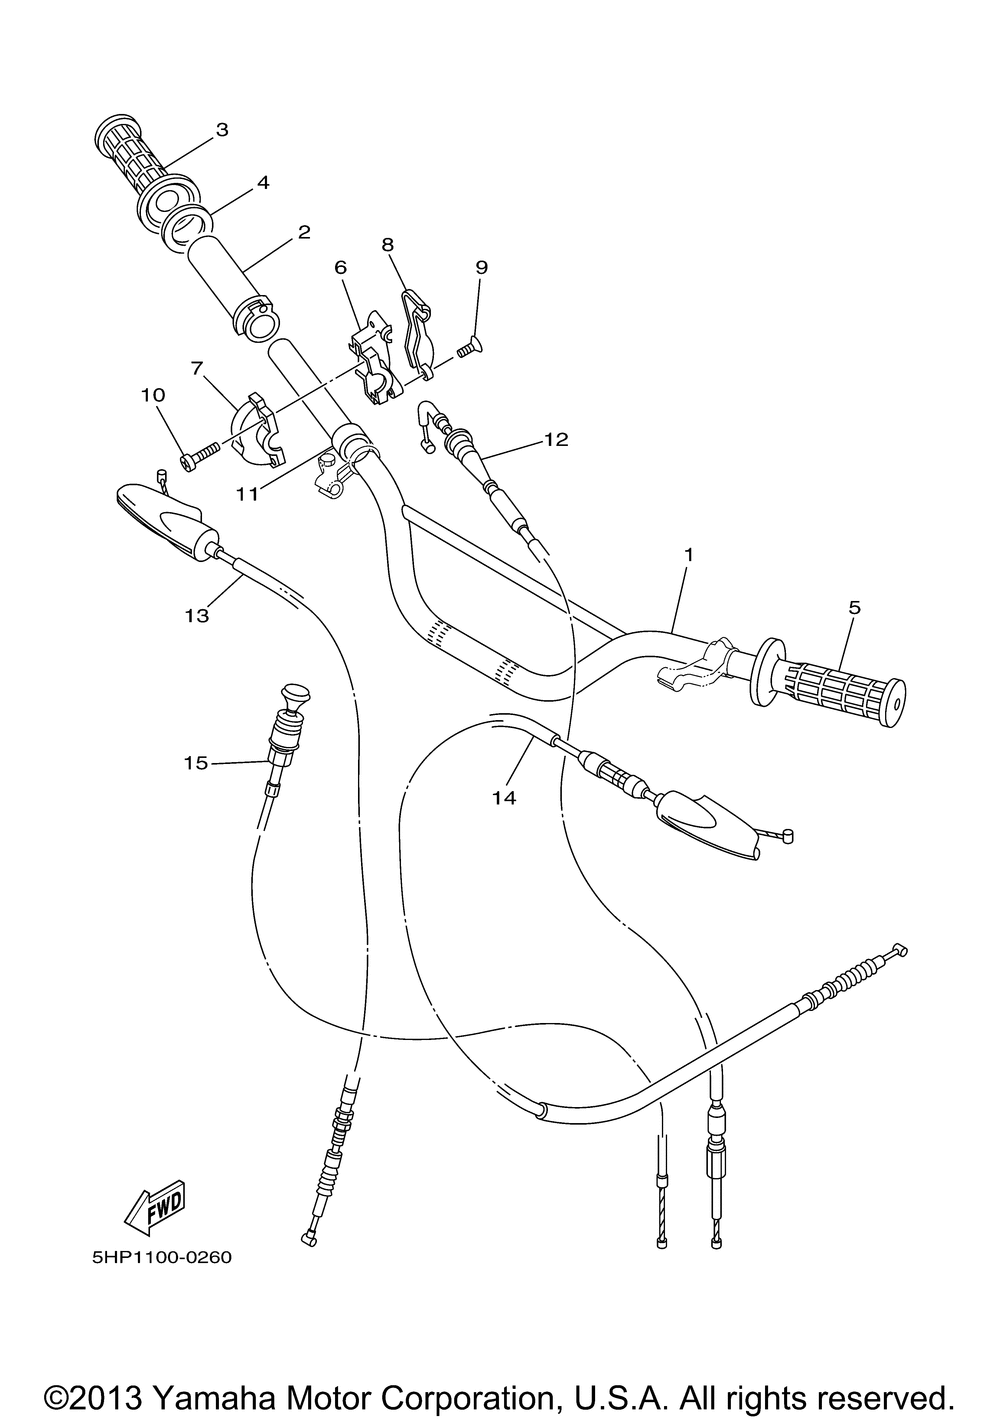 Steering handle cable